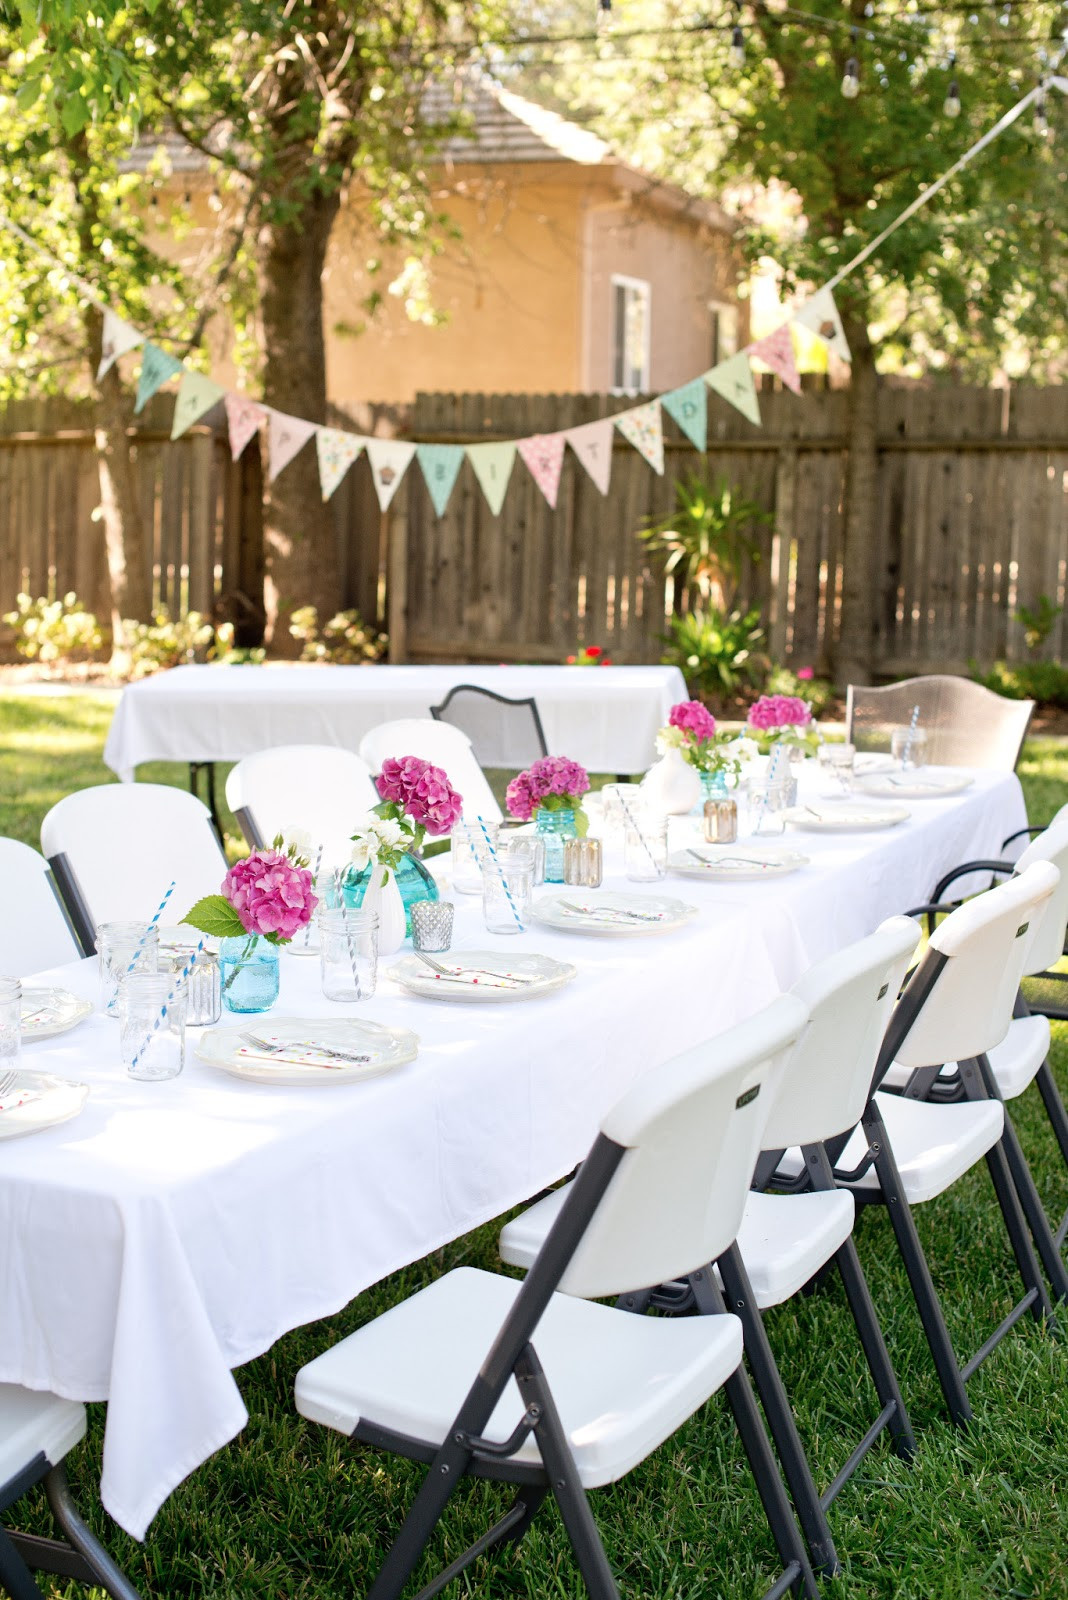 Chic Simple Backyard Graduation Party Decorating Ideas
 Simple Birthday Table Decoration For Dinner Flauminc